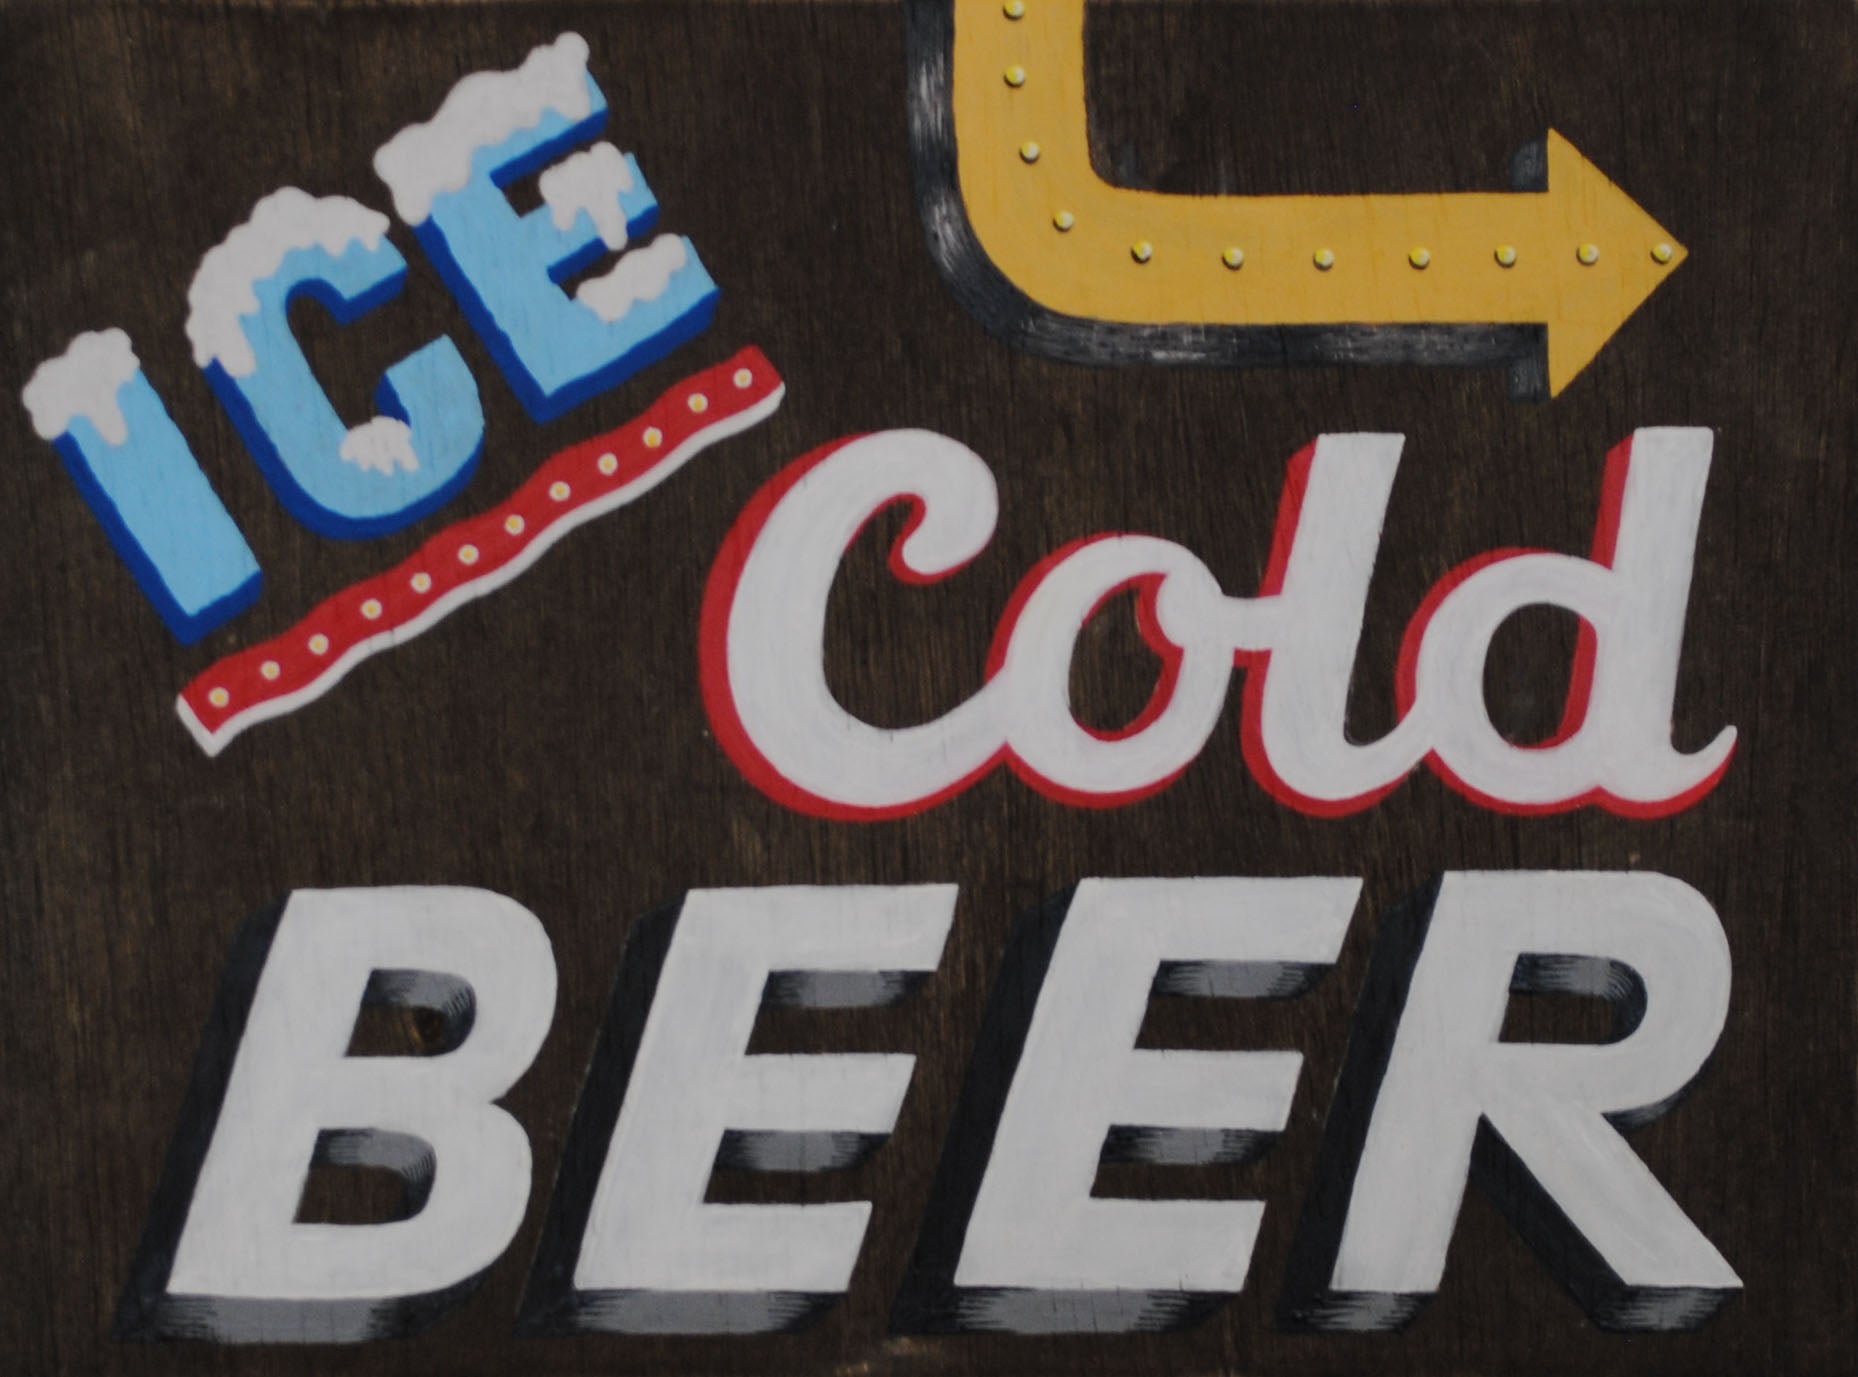 "Cold Beer That A Way" by Erik Lundquist